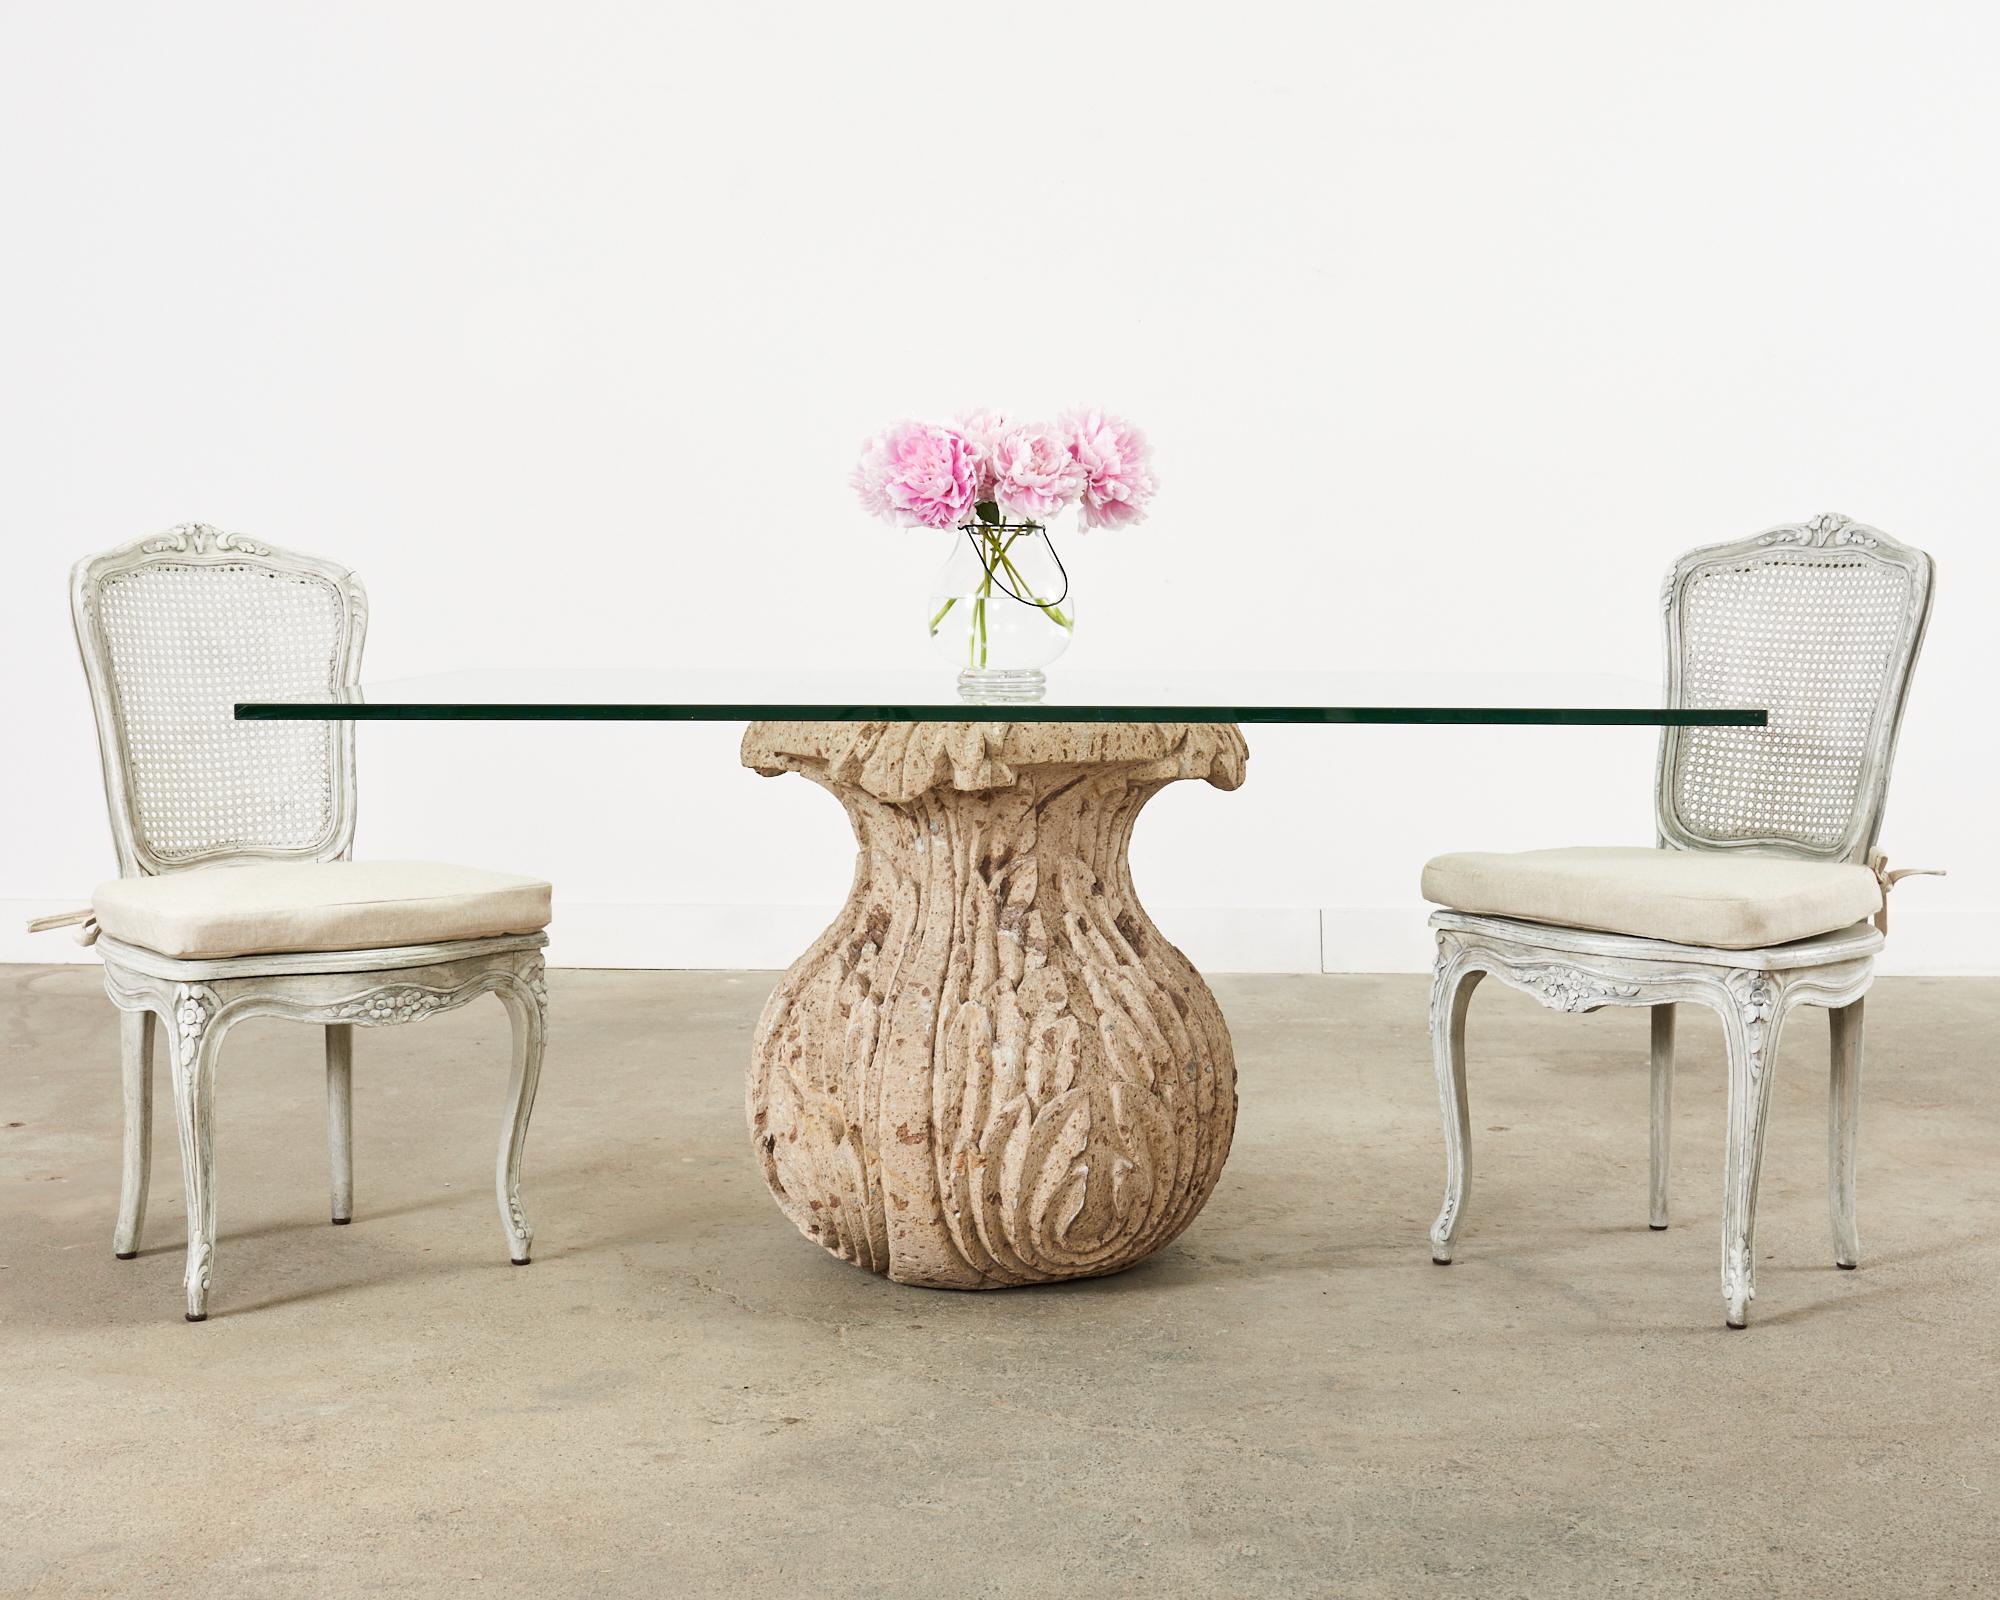 Imposing molded stone patio and garden dining table featuring a tulip shaped bulbous formed base decorated with acanthus in the neoclassical taste. The base is very heavy with an organic bell-shaped form that flares out on the top. Beautifully